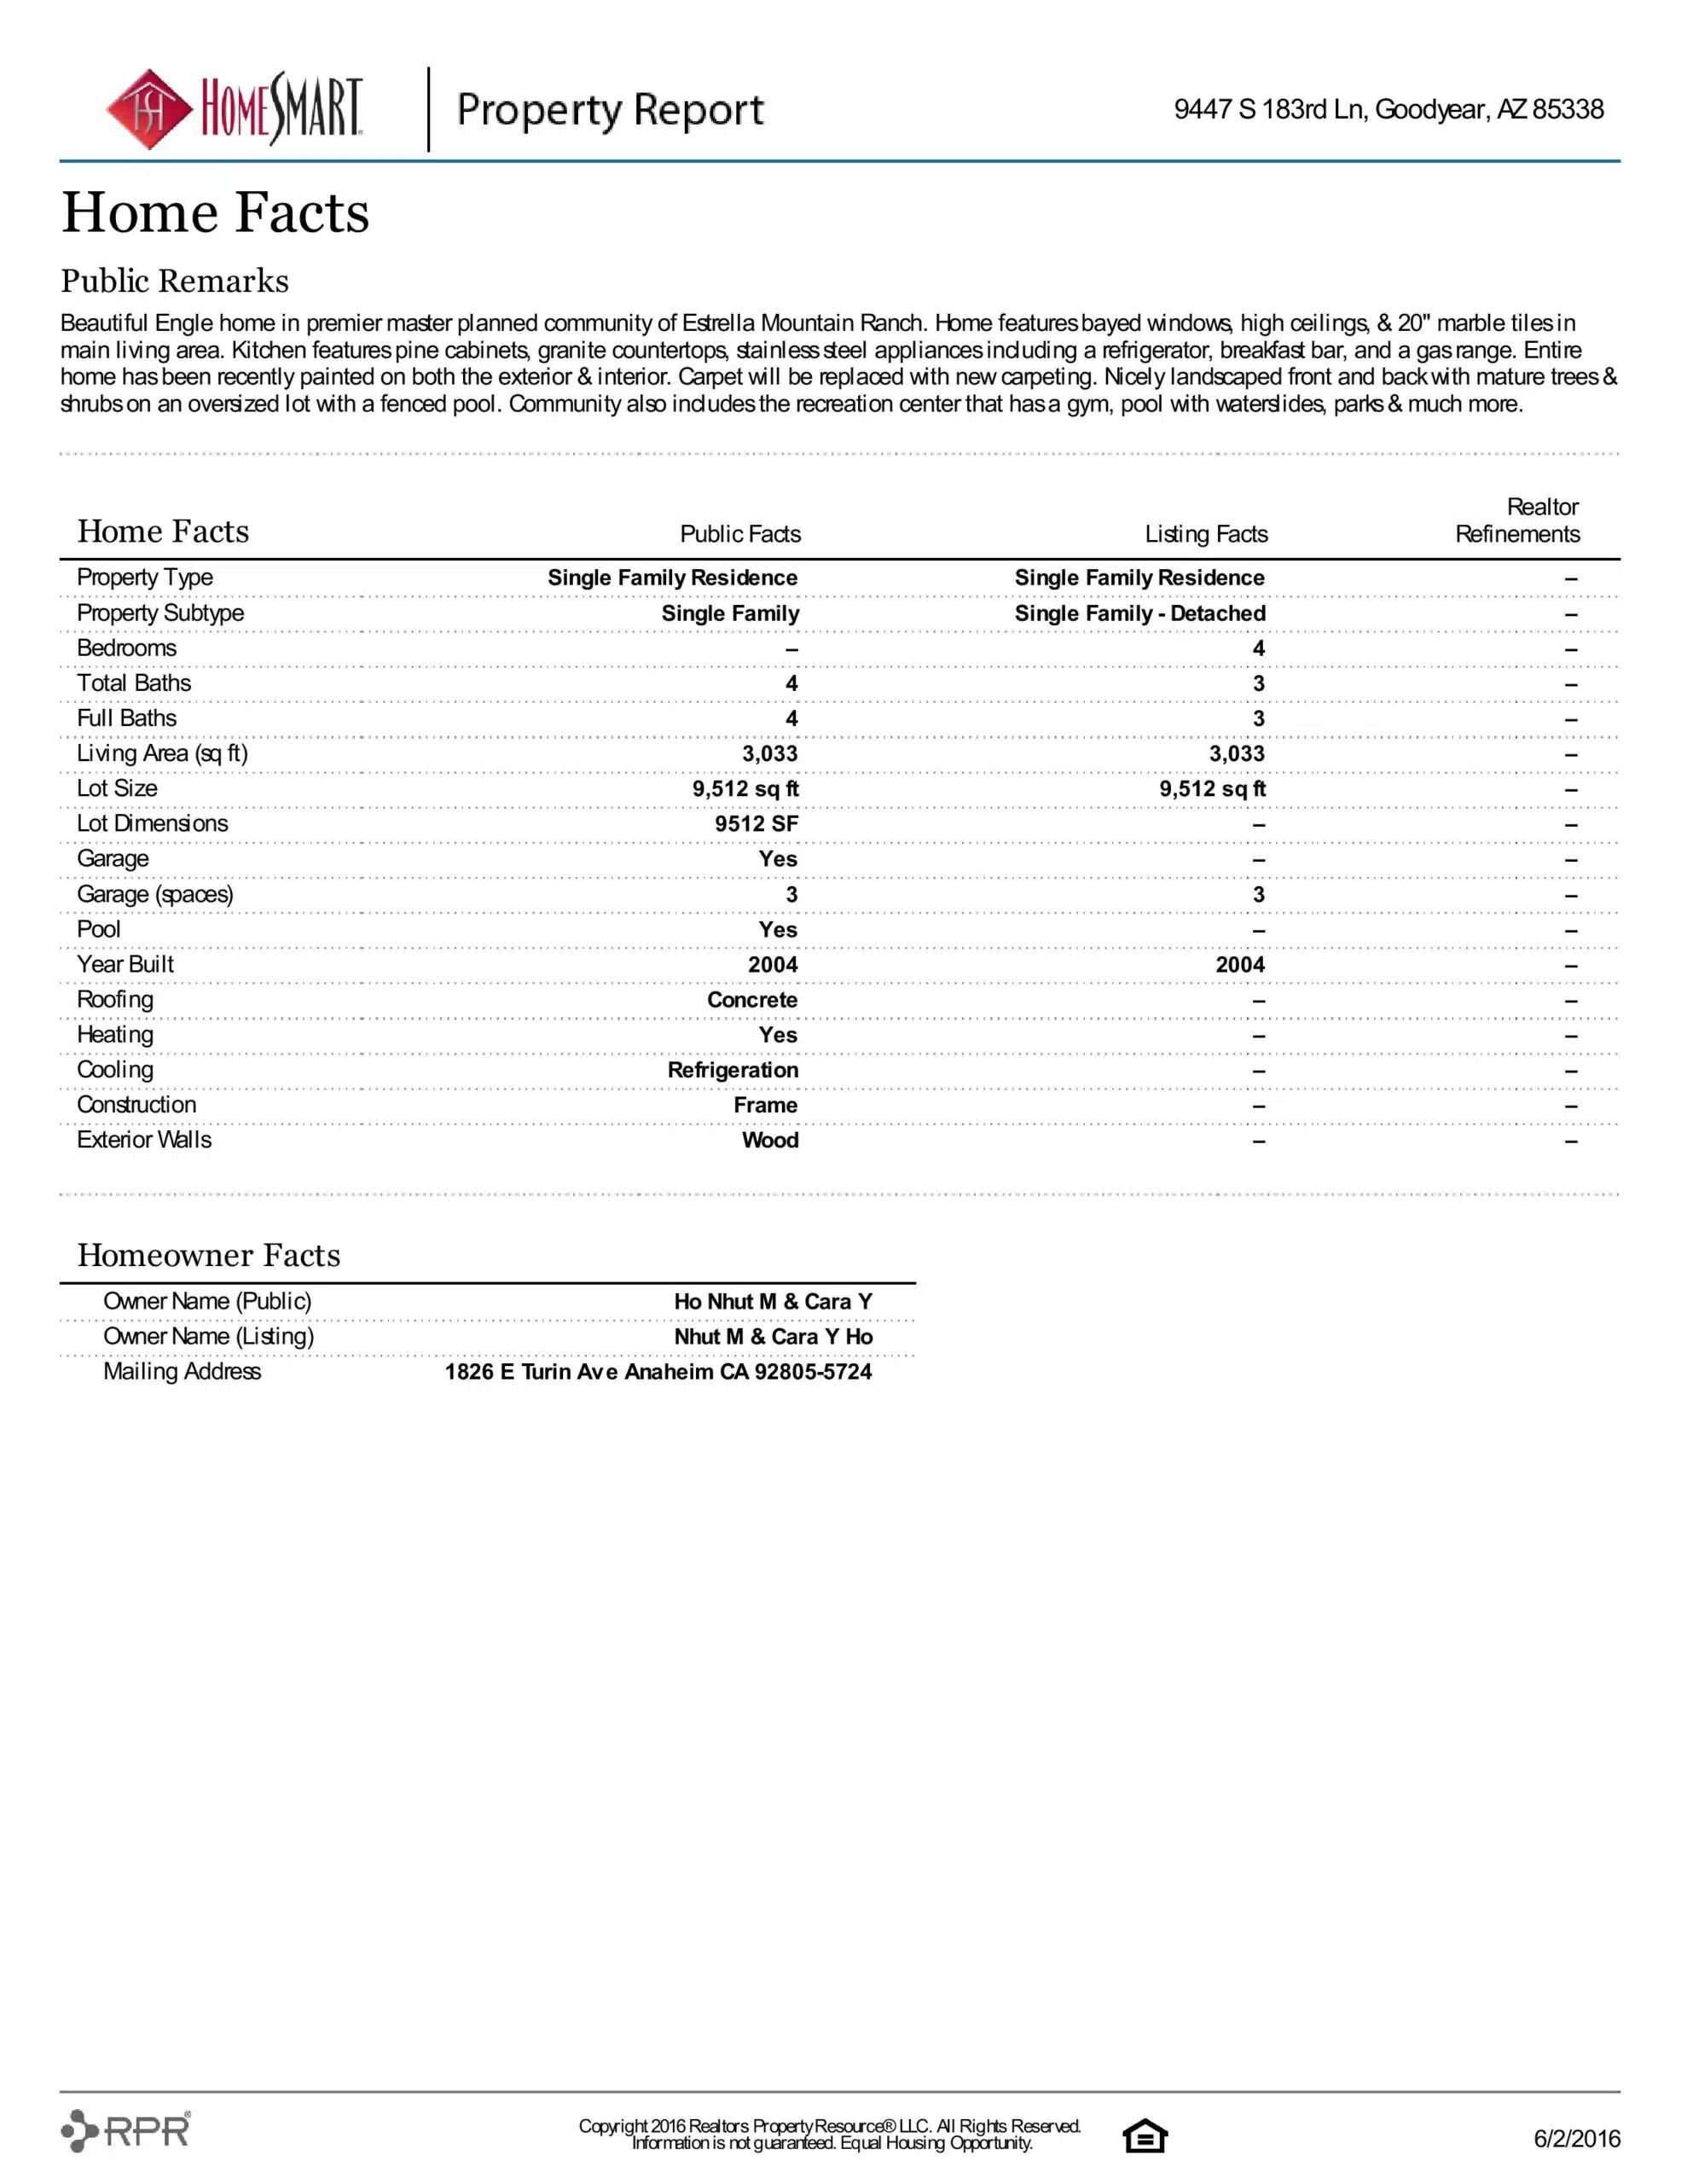 9447 S 183RD LANE PROPERTY REPORT-page-003